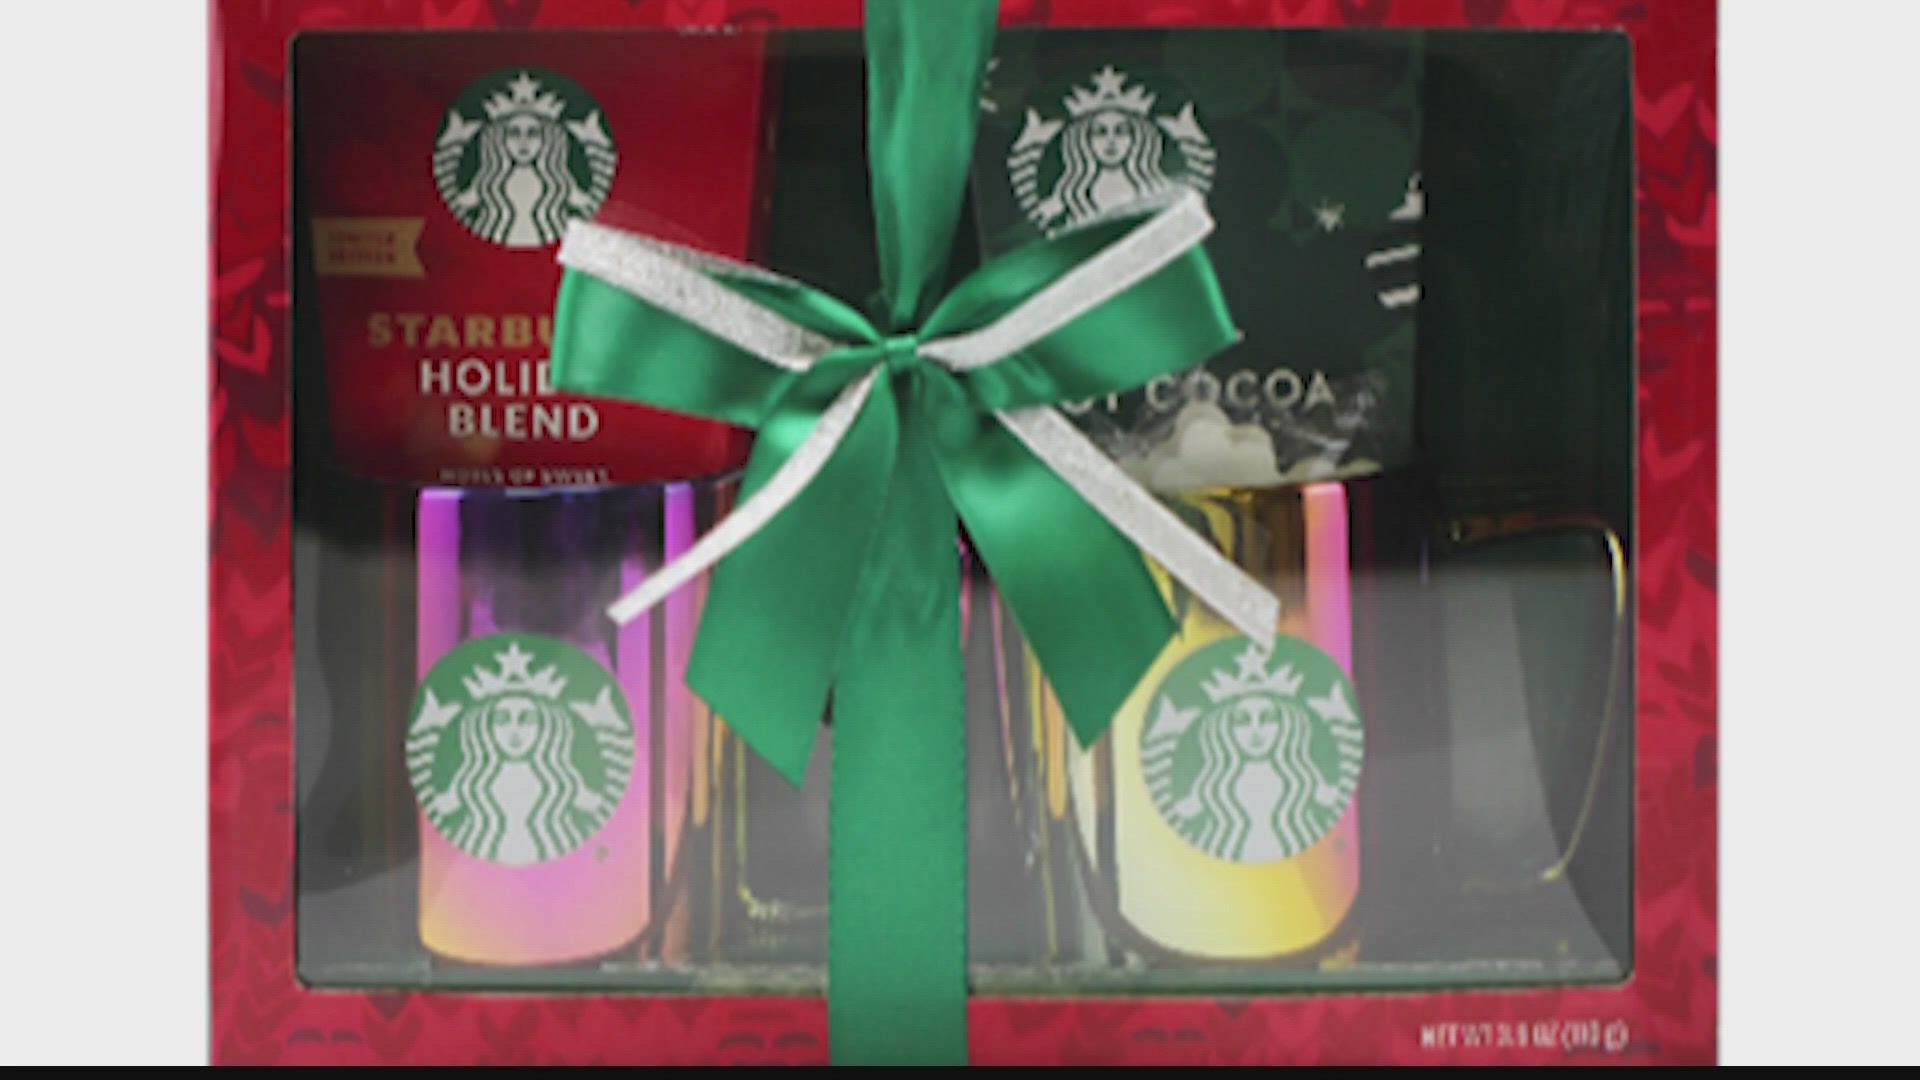 Nestle is recalling 400,000 metallic mugs that were included in the 2023 holiday Starbucks branded gift sets.